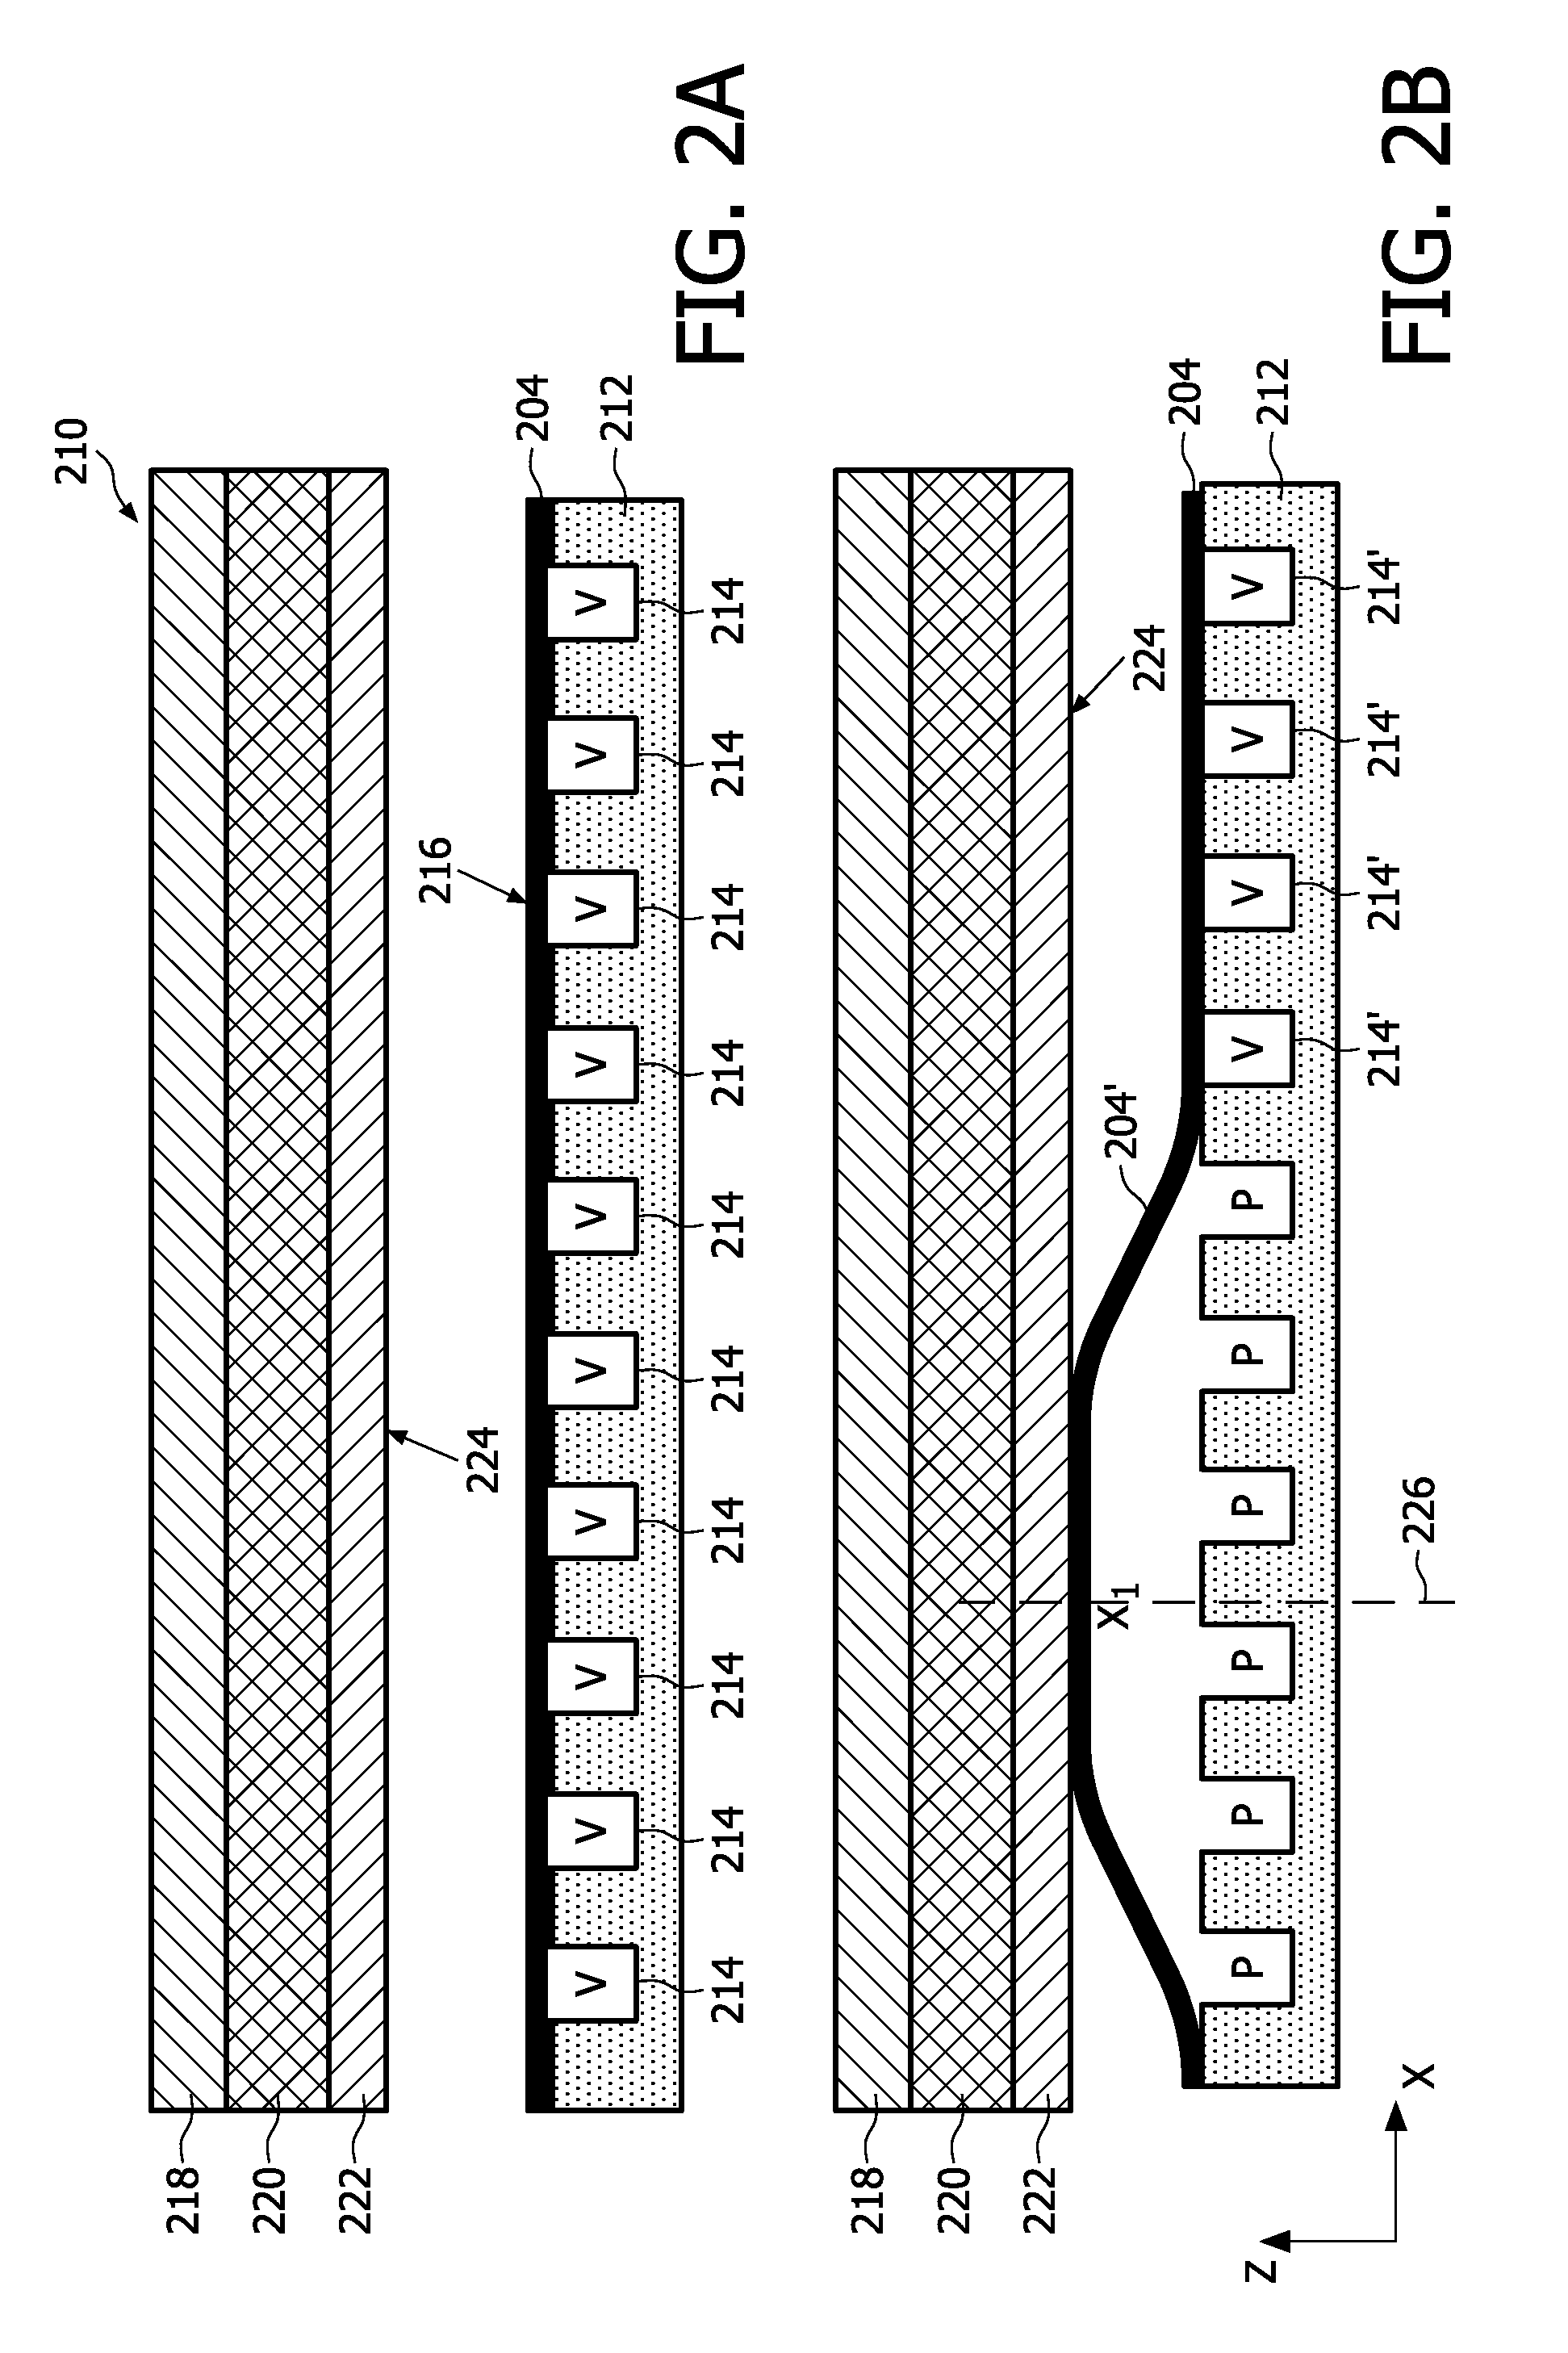 Method and system for contacting of a flexible sheet and a substrate